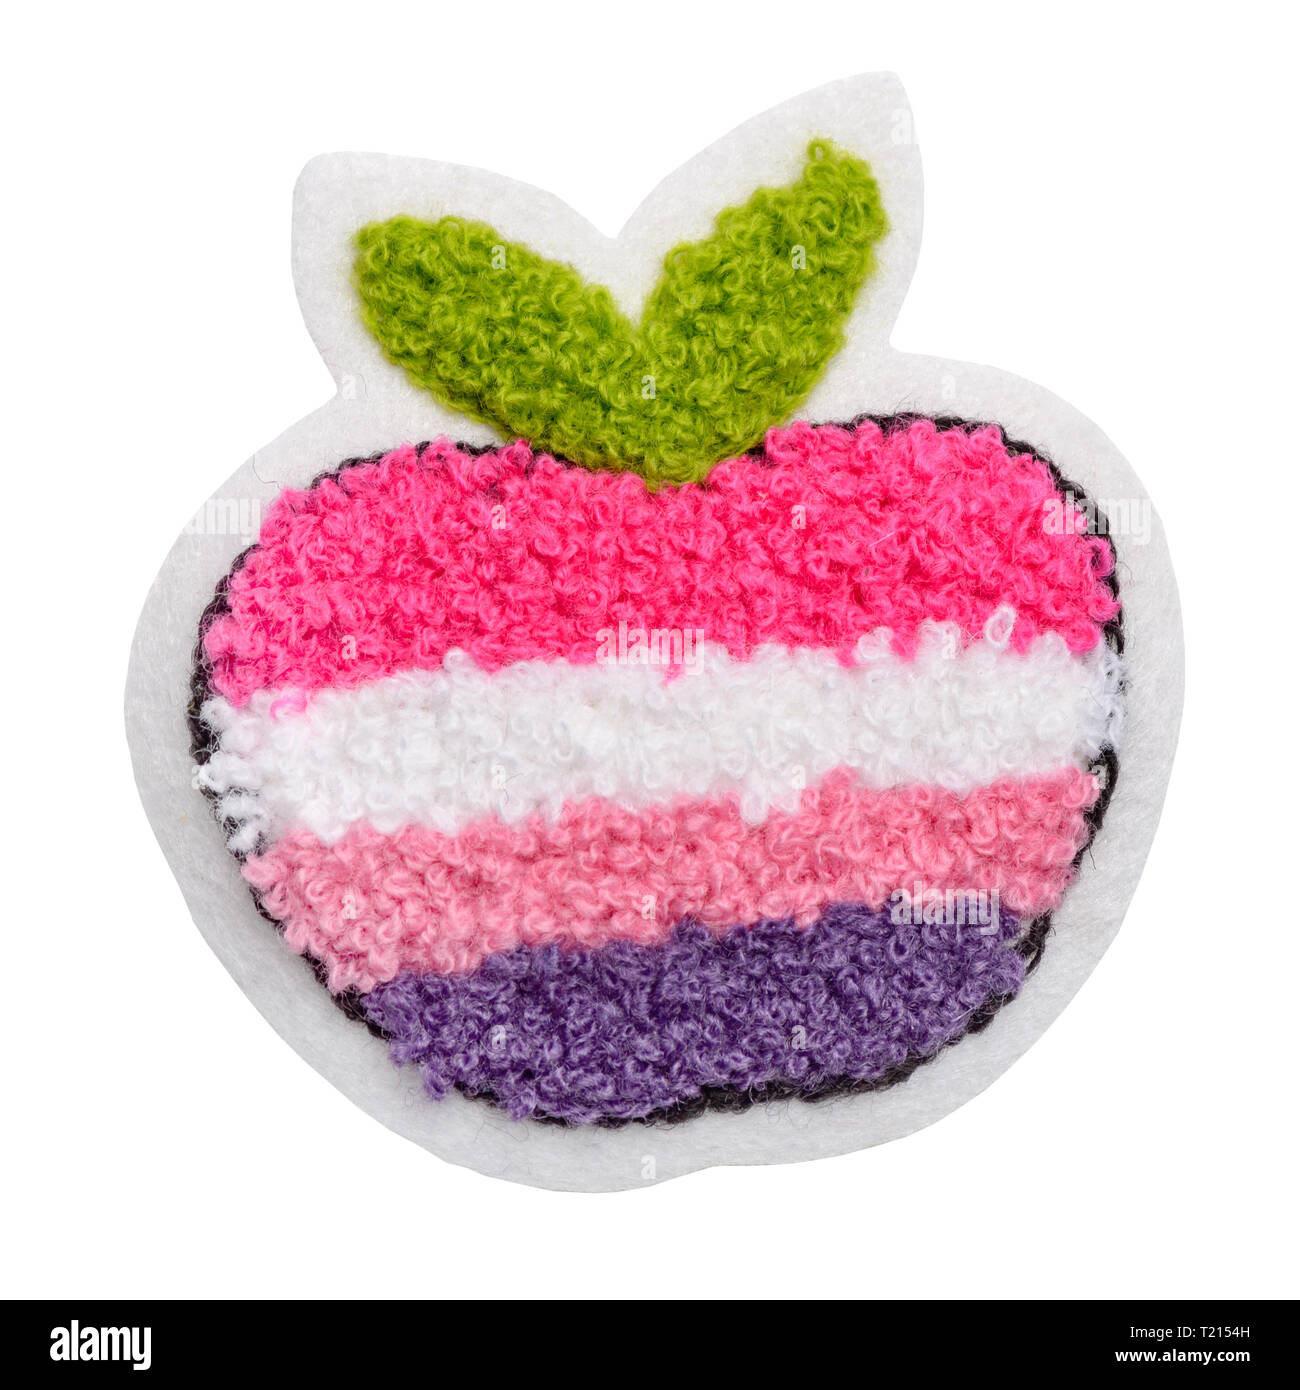 Colorful apple fabric patch Stock Photo